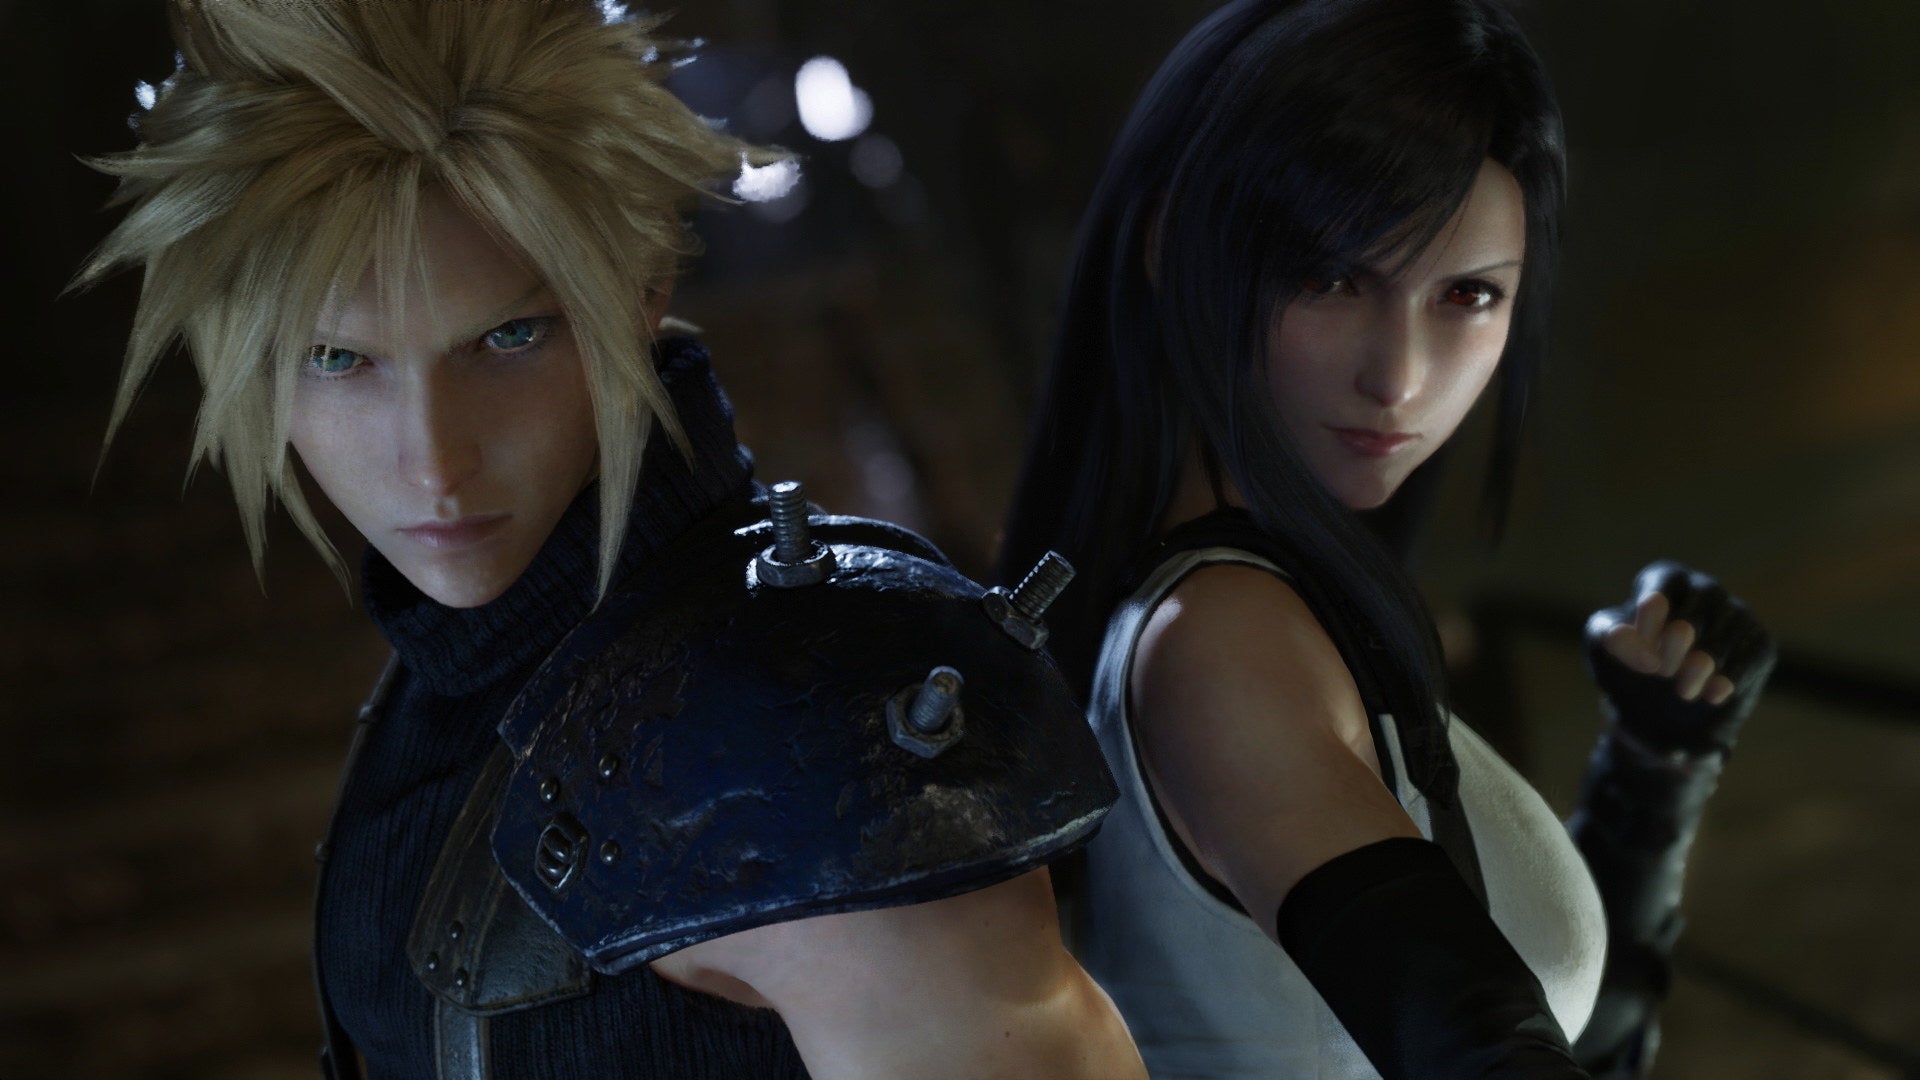 Final Fantasy 7 Remake's PS4 exclusivity ends in April 2021 | Rock 